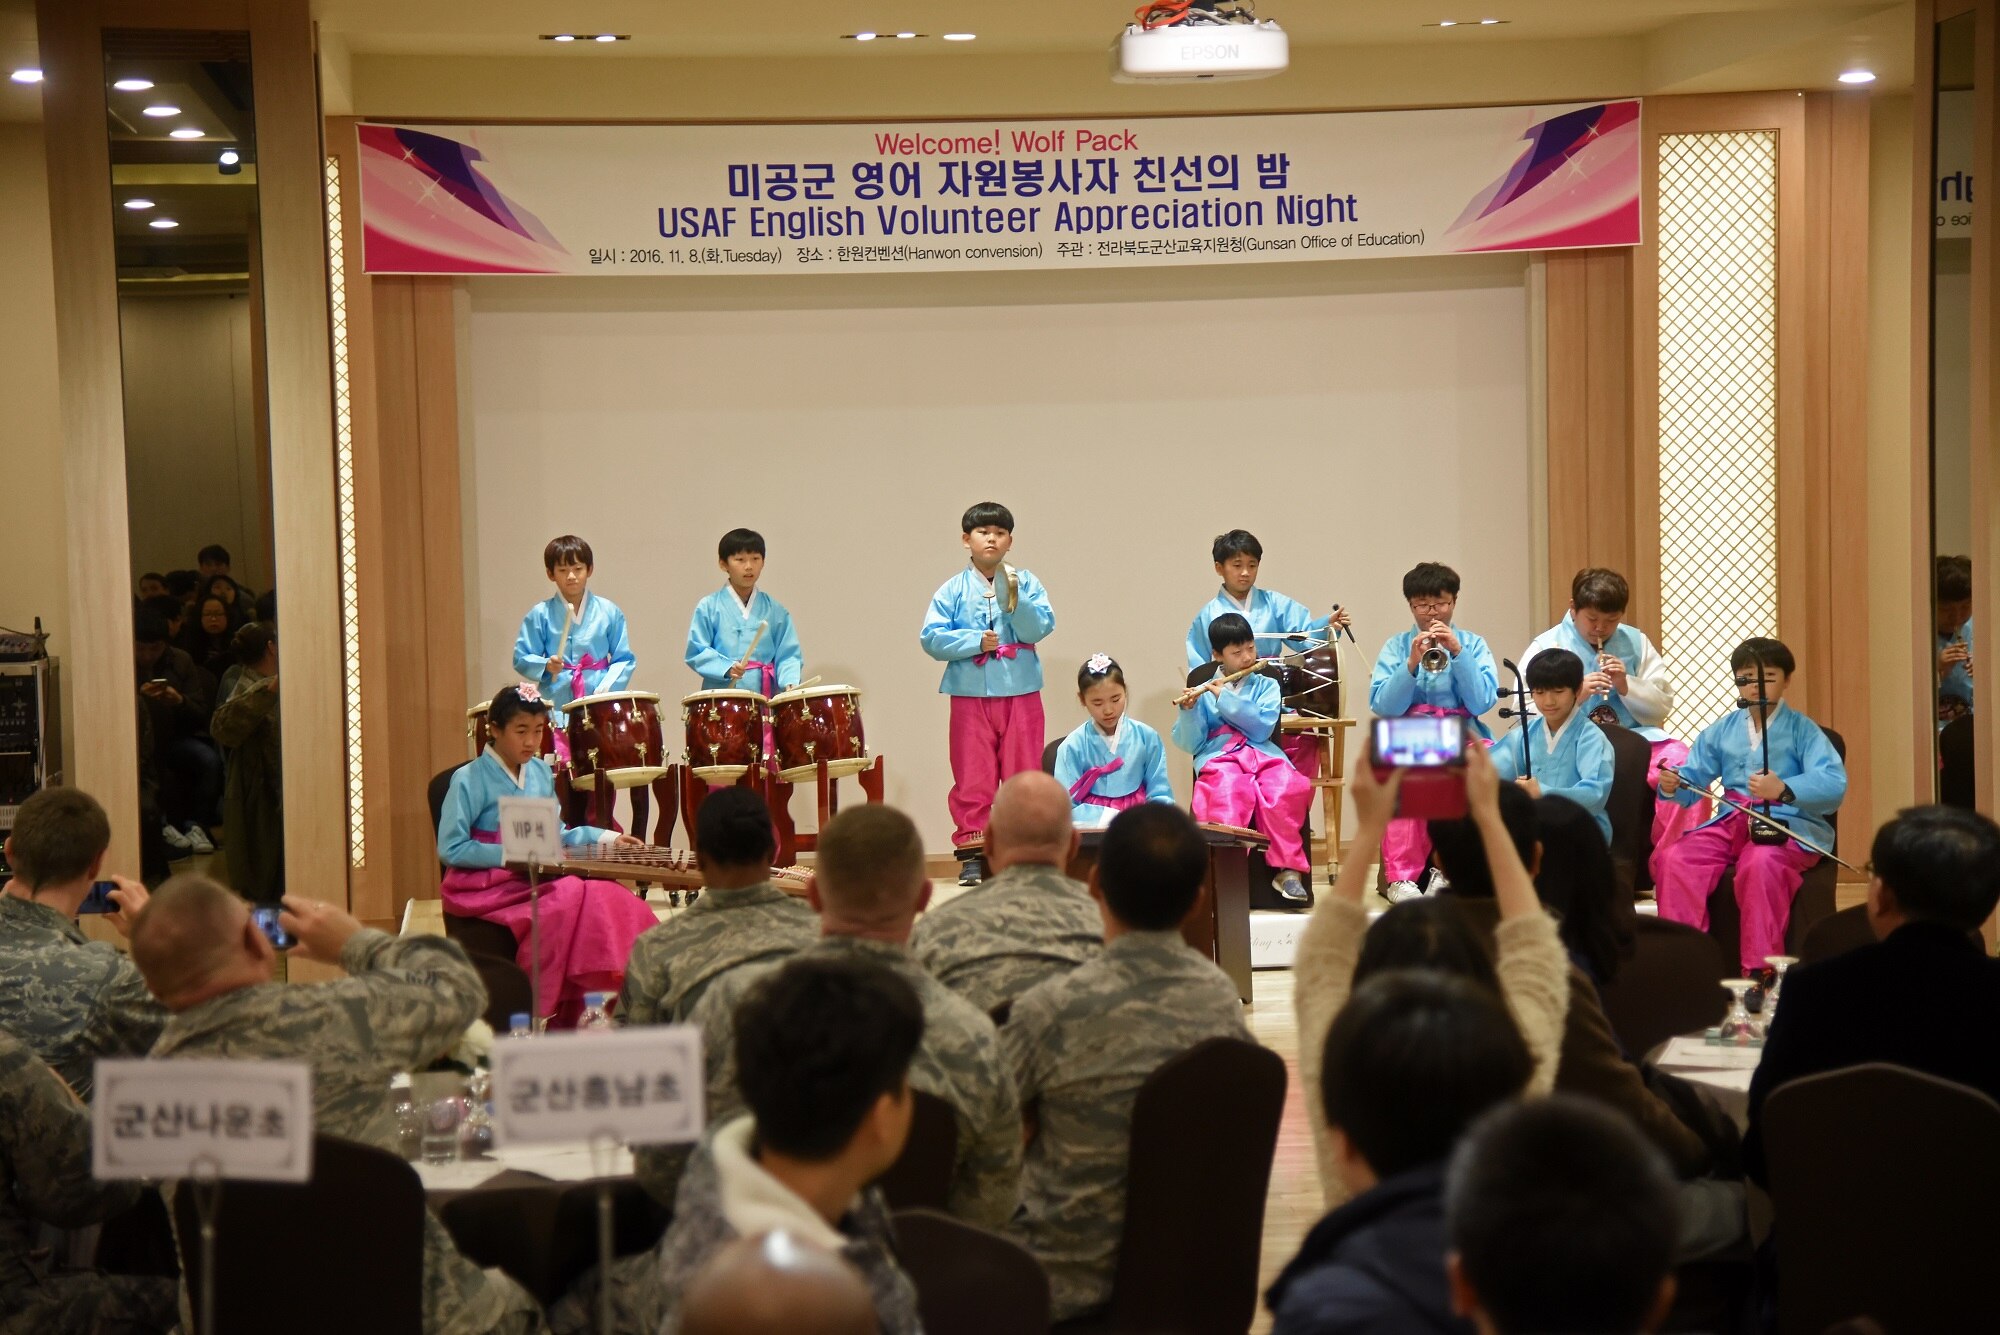 Students from Dangbook Elementary School perform during a volunteer appreciation night at the Hanwon Convention room in the city of Gunsan, Republic of Korea, Nov. 8, 2016. The students participated in an English language program taught by 8th Fighter Wing airmen. (U.S. Air Force photo by Tech. Sgt. Jeff Andrejcik/Released)